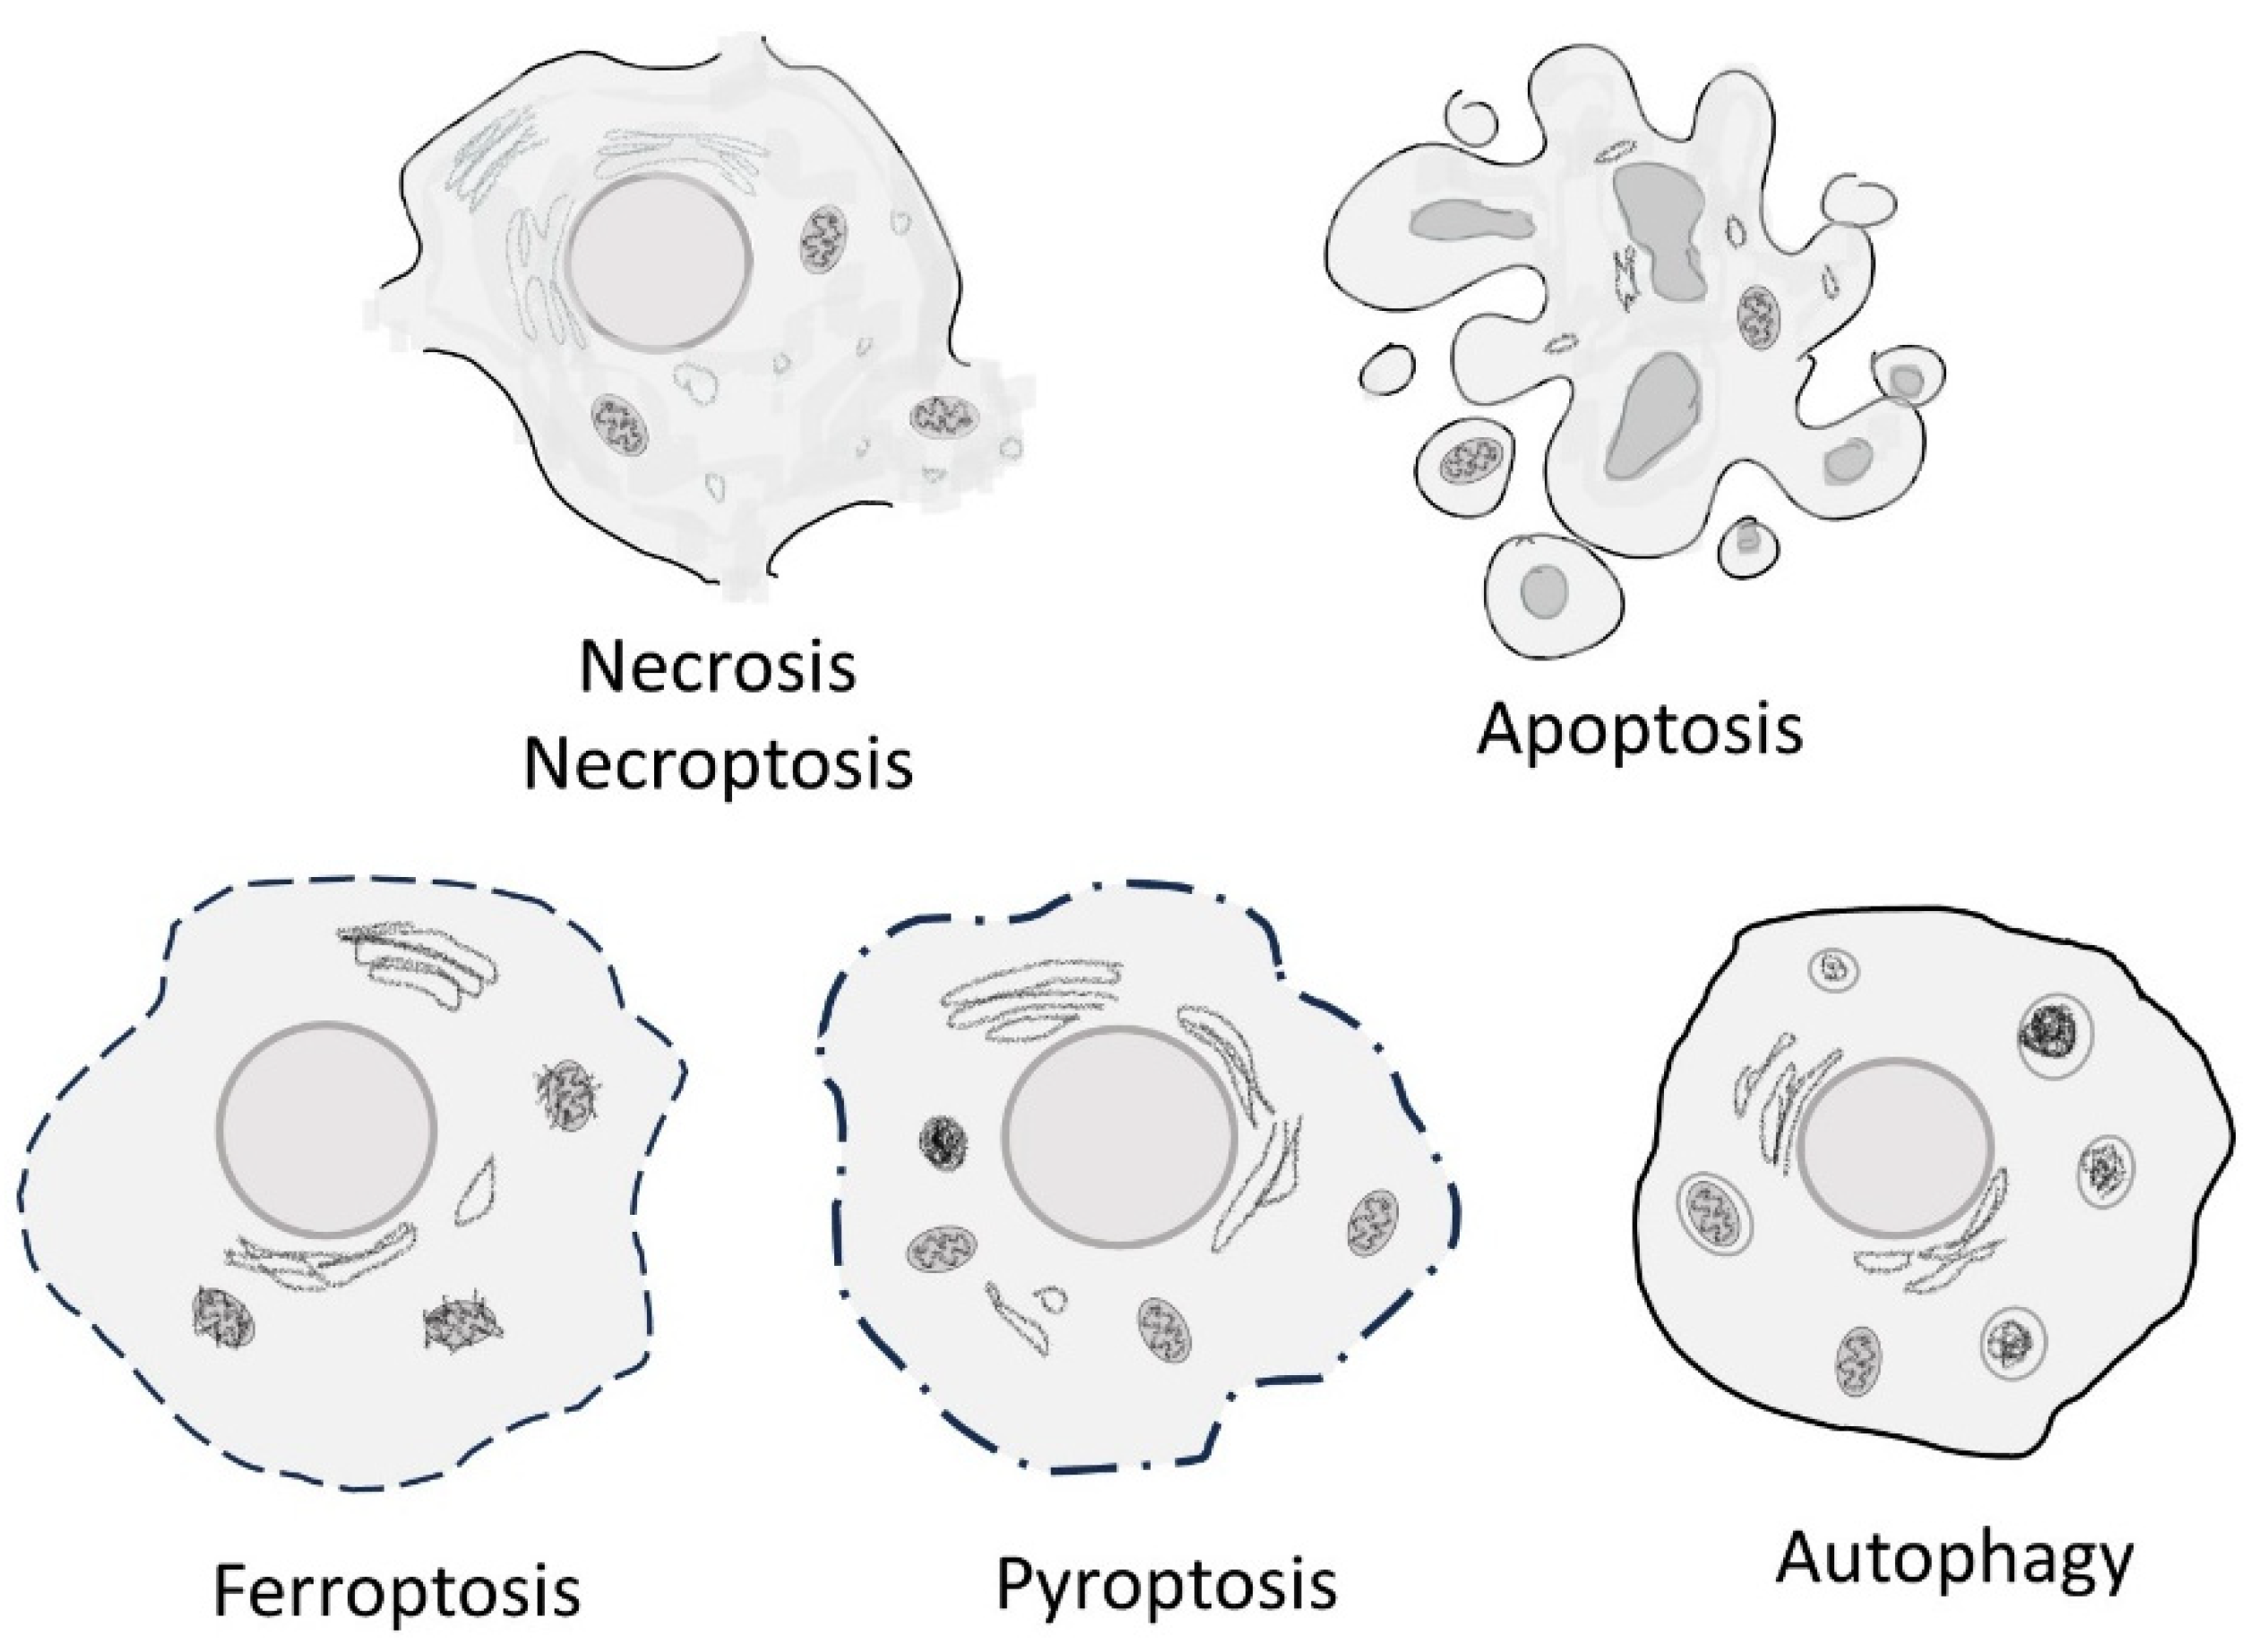 Types of cell death according to the Nomenclature Committee on